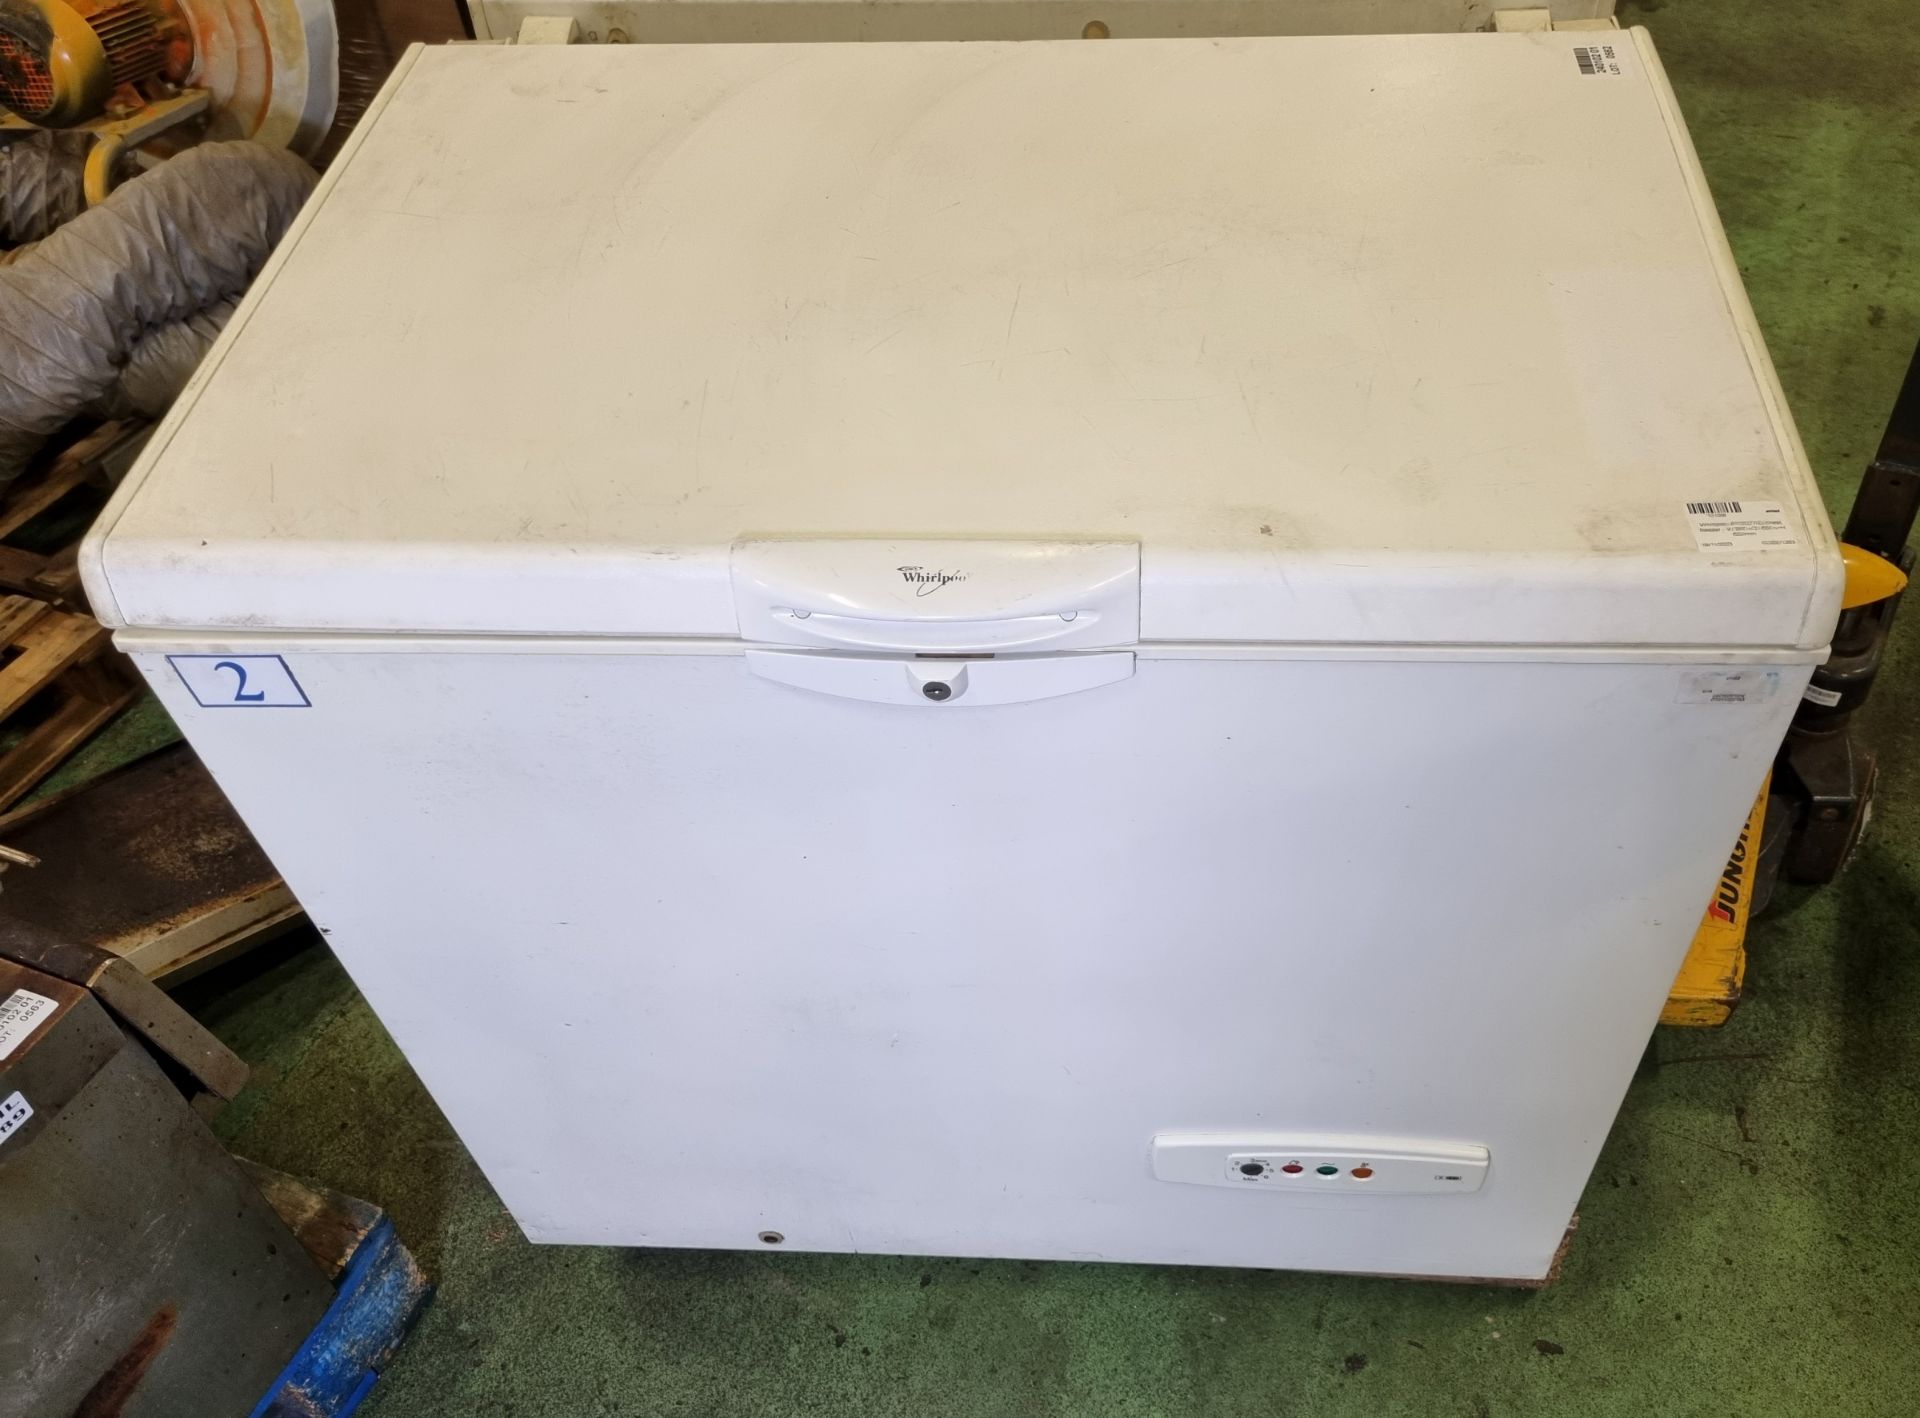 Whirlpool AFG527/G chest freezer - W 950 x D 650 x H 850mm - Image 2 of 5